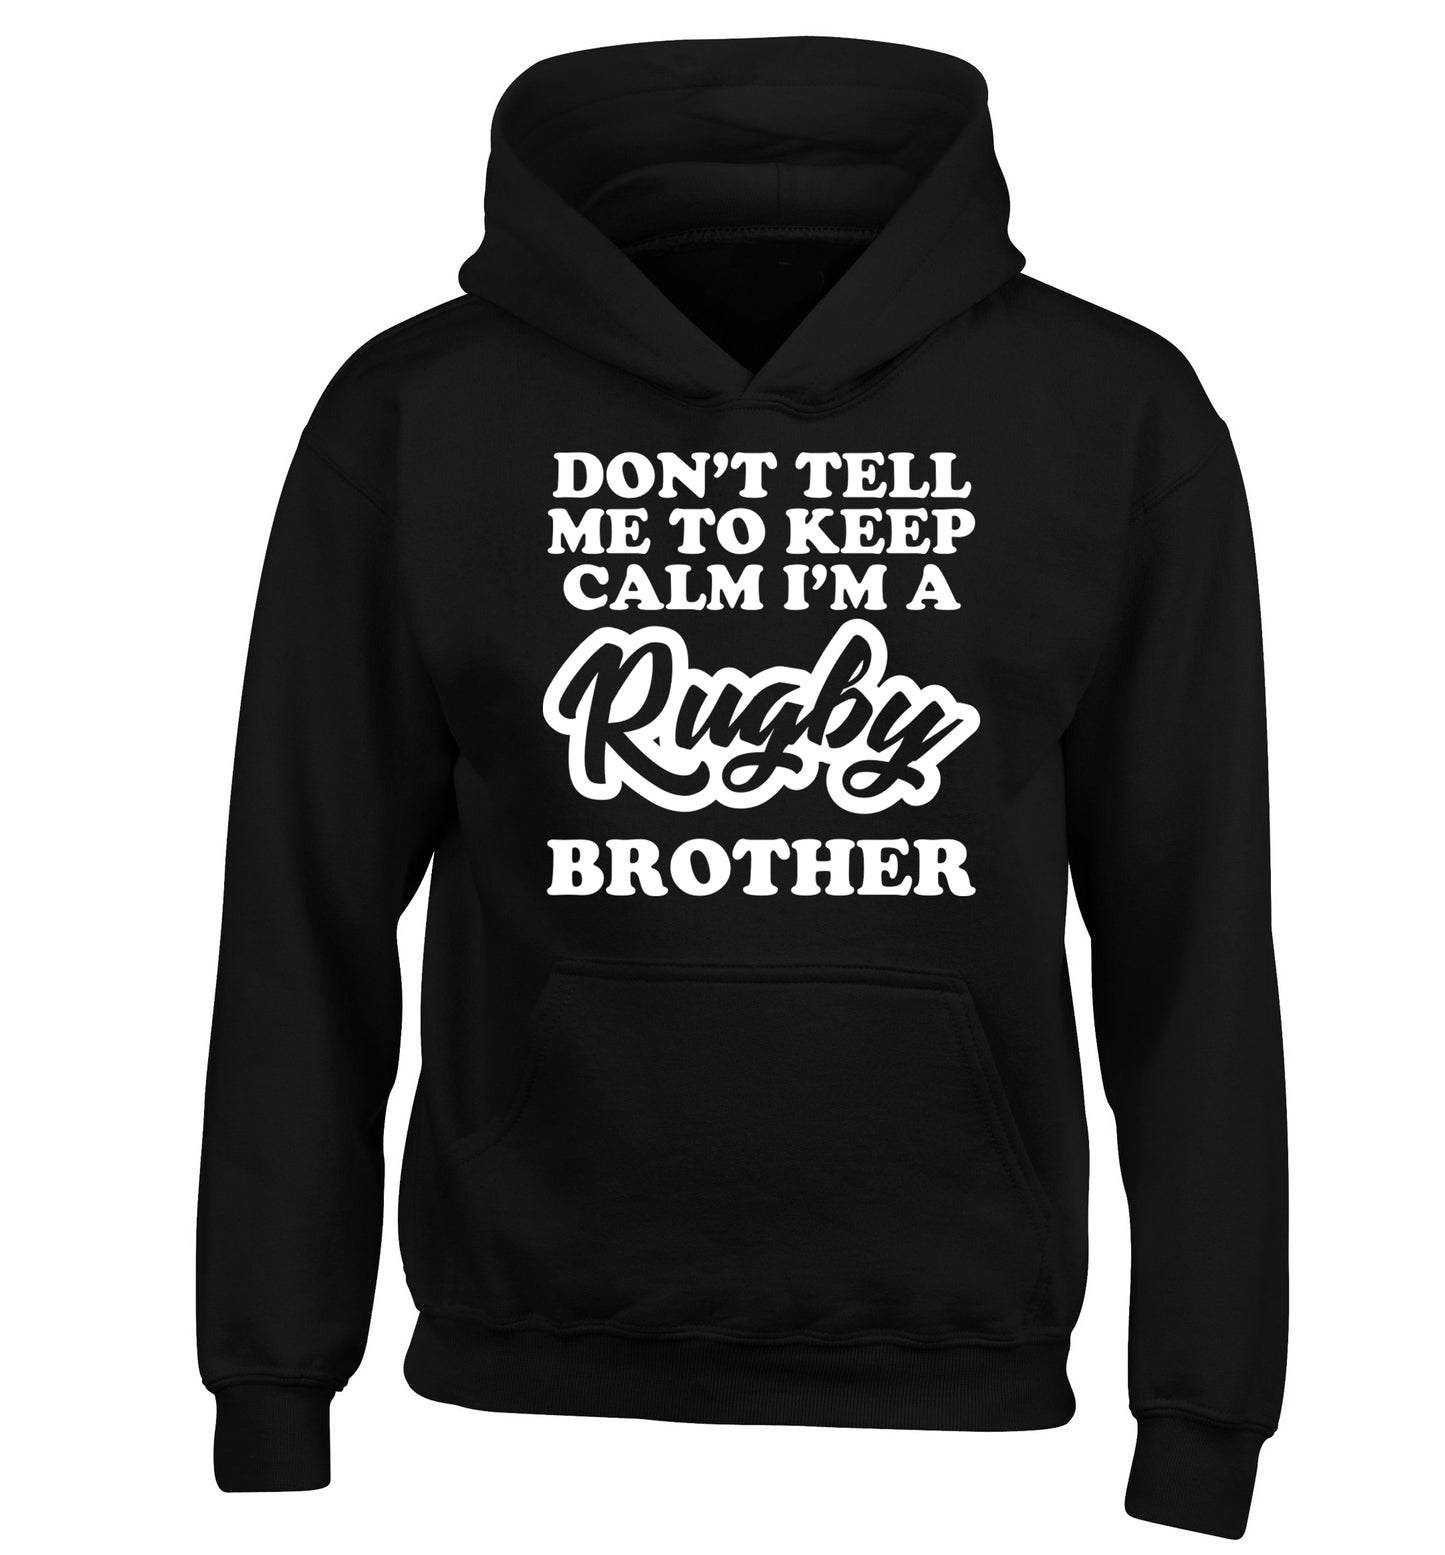 Don't tell me keep calm I'm a rugby brother children's black hoodie 12-13 Years